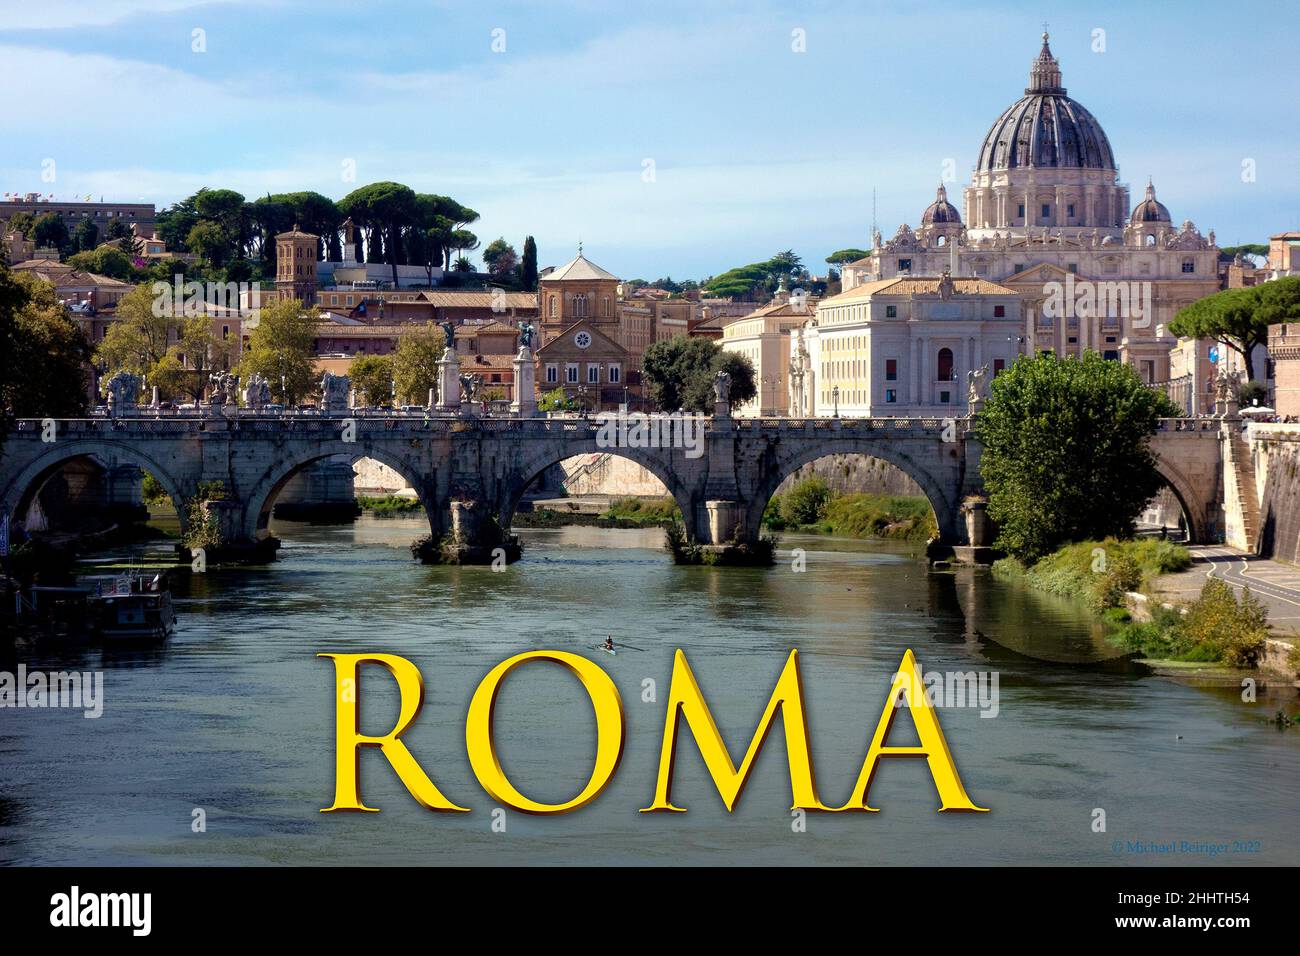 Poster of Rome, view of Tiber, St. Peter's dome Stock Photo